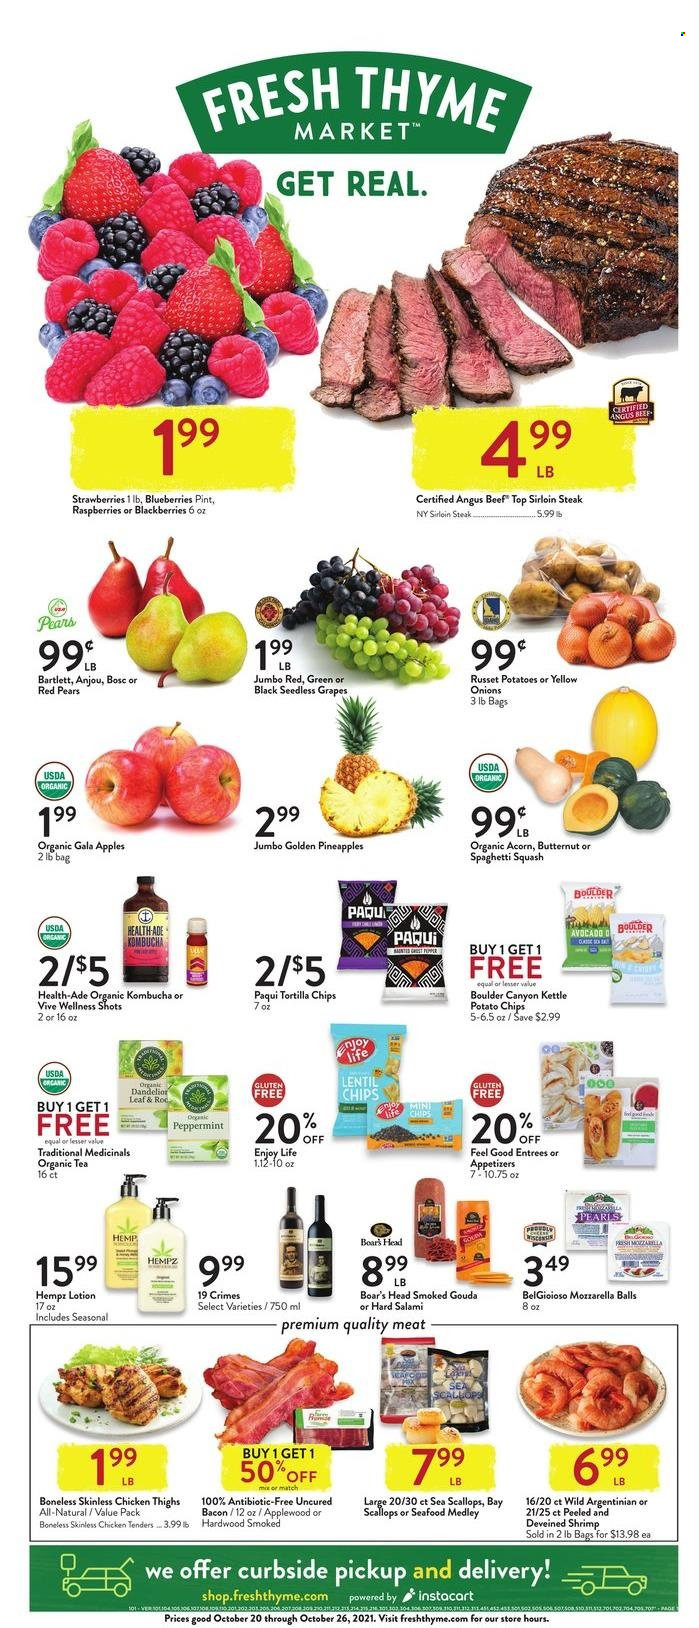 thumbnail - Fresh Thyme Flyer - 10/20/2021 - 10/26/2021 - Sales products - seedless grapes, russet potatoes, onion, apples, avocado, blackberries, blueberries, Gala, grapes, strawberries, pineapple, pears, scallops, seafood, shrimps, chicken tenders, bacon, salami, gouda, mozzarella, tortilla chips, potato chips, chips, kombucha, tea, chicken thighs, beef meat, beef sirloin, steak, sirloin steak, butternut squash. Page 1.